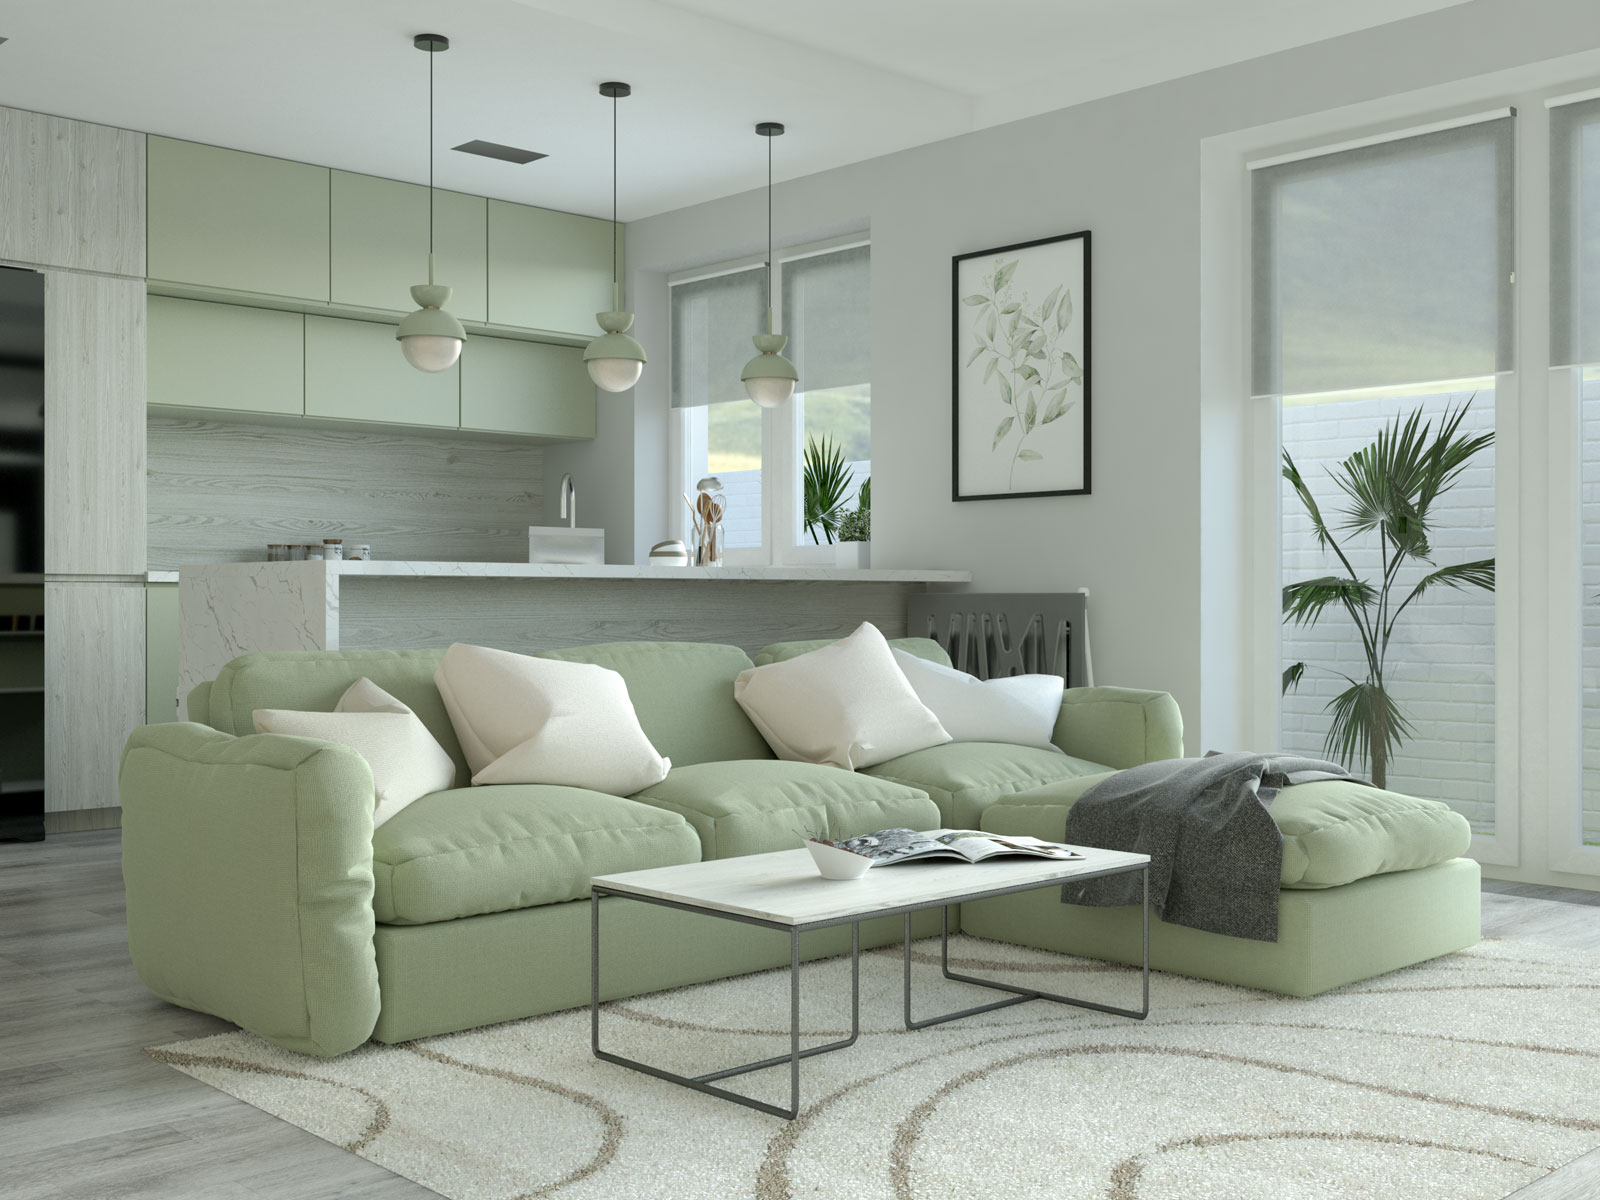 Living room with sage furniture and cream accents